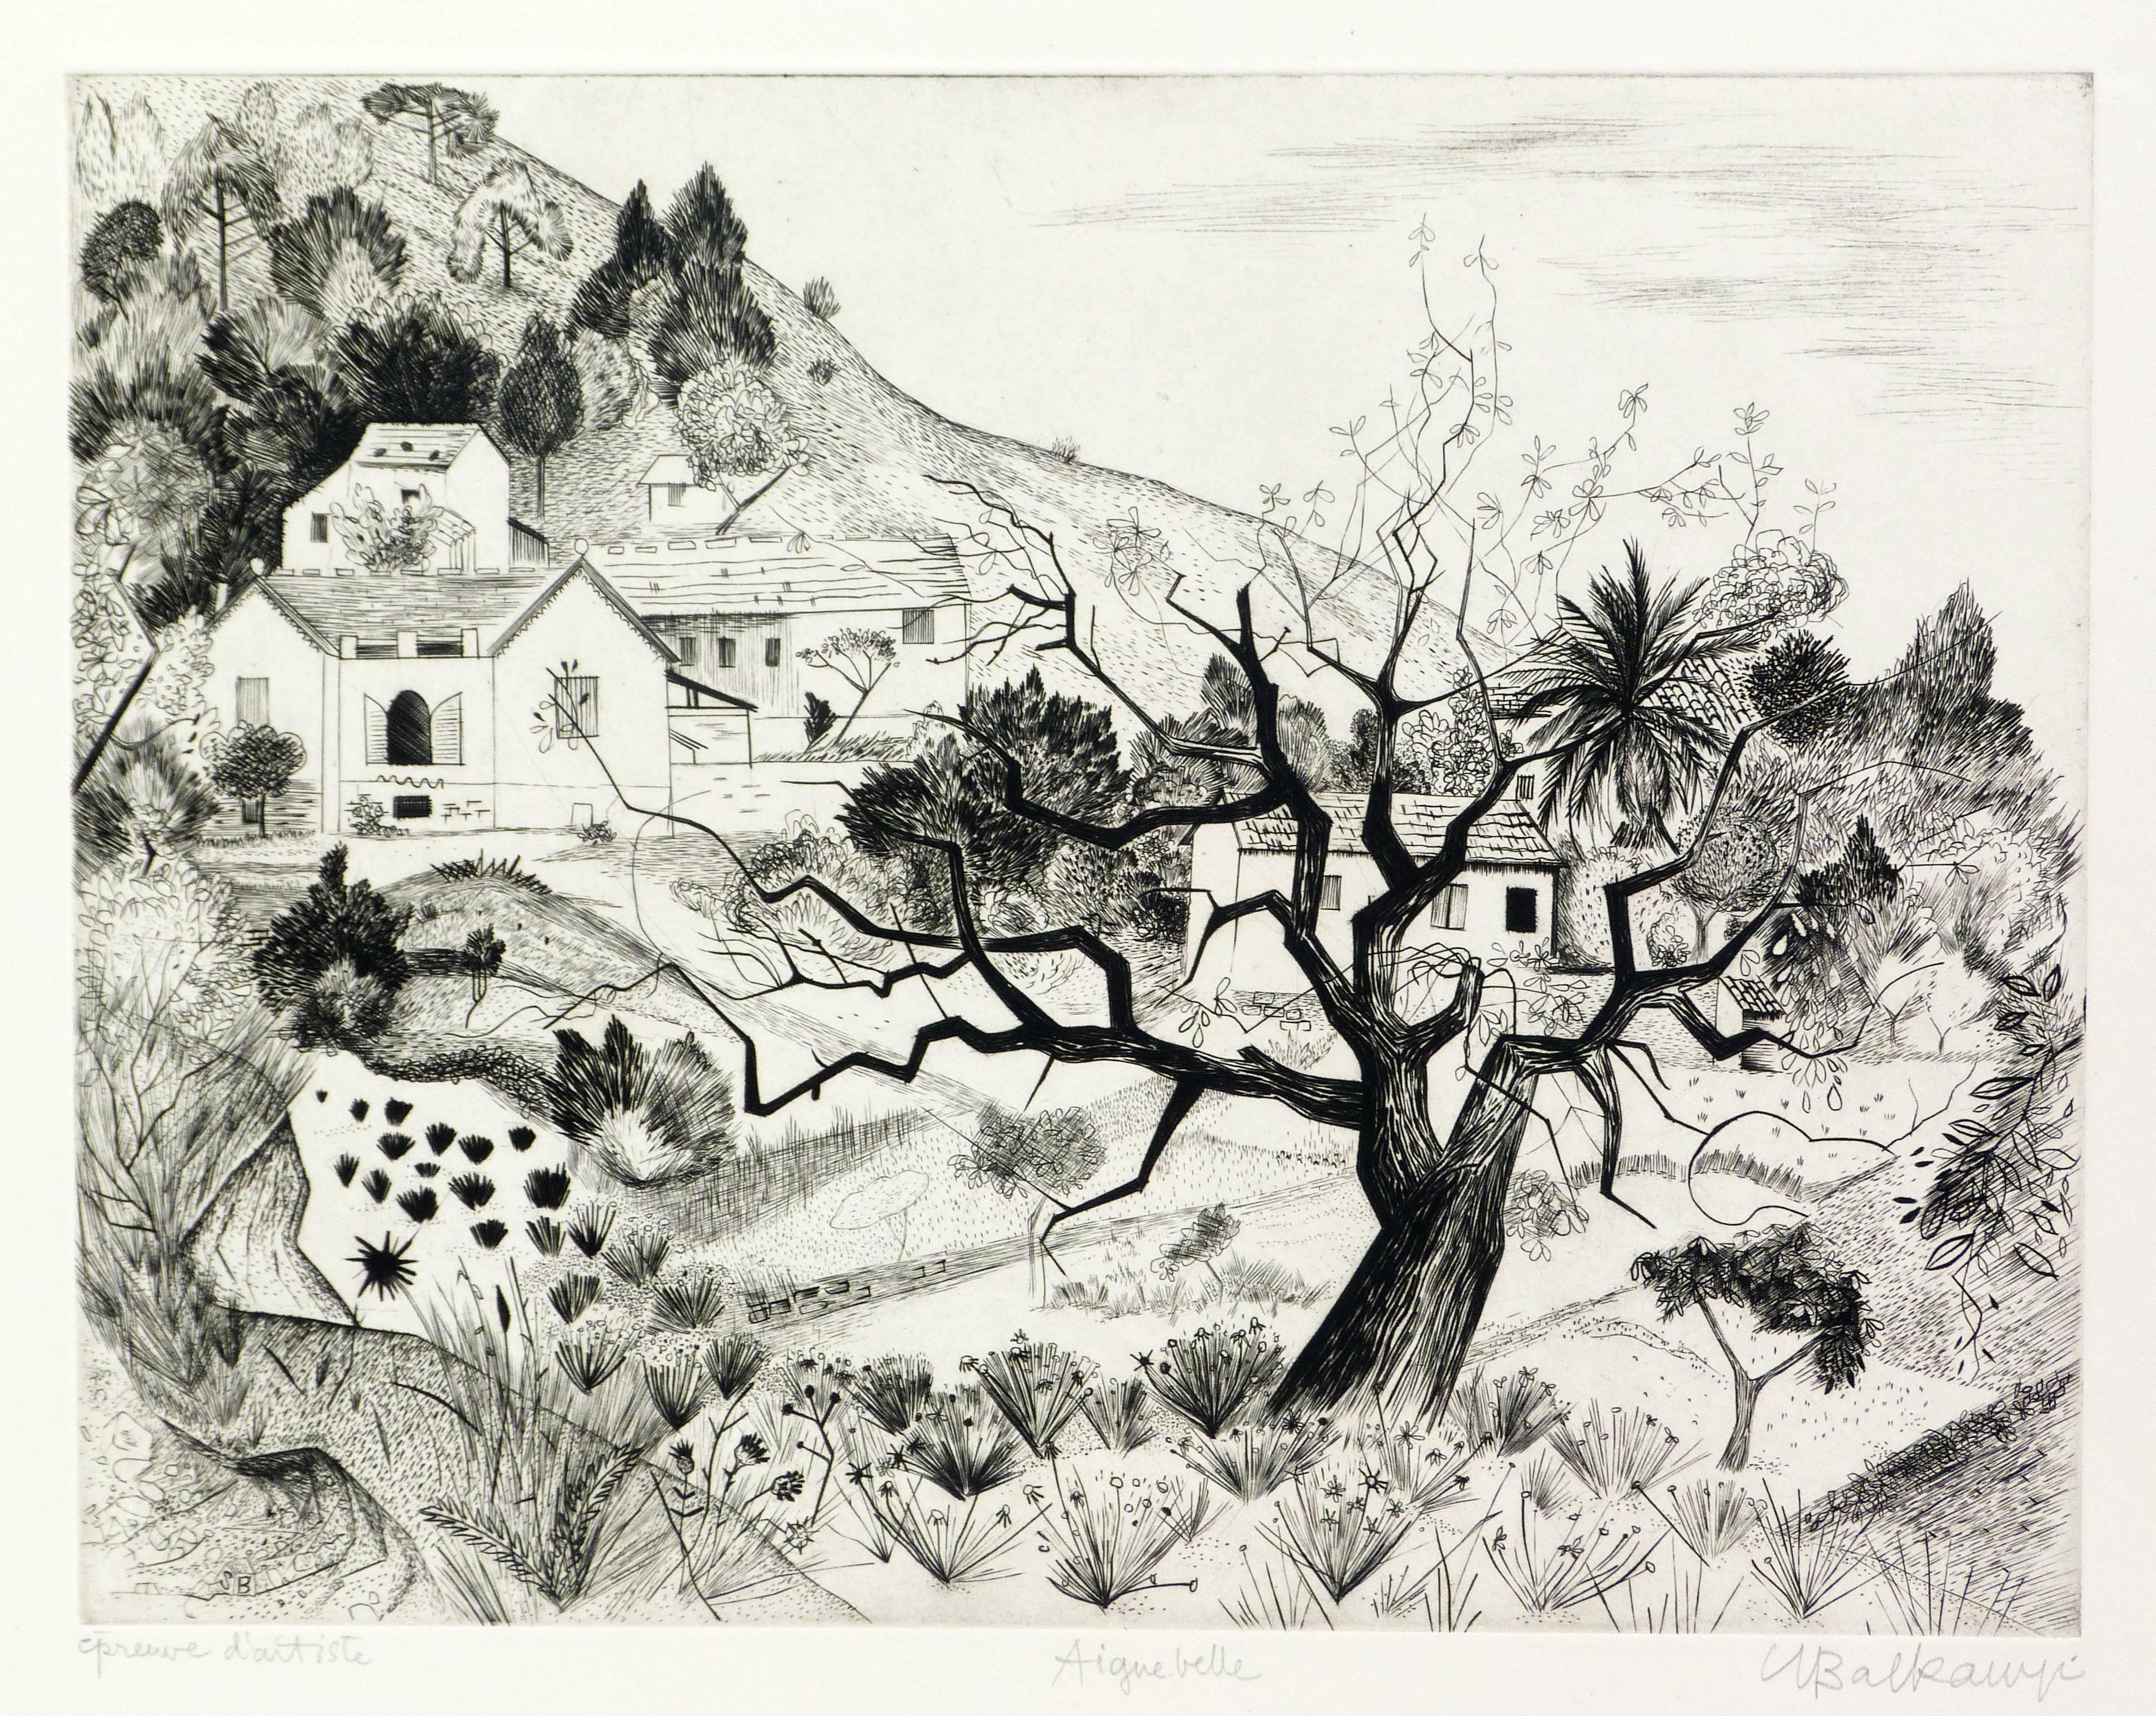 Suzanne Balkanyi Landscape Print - A view of Aiguebelle in Savoie, France